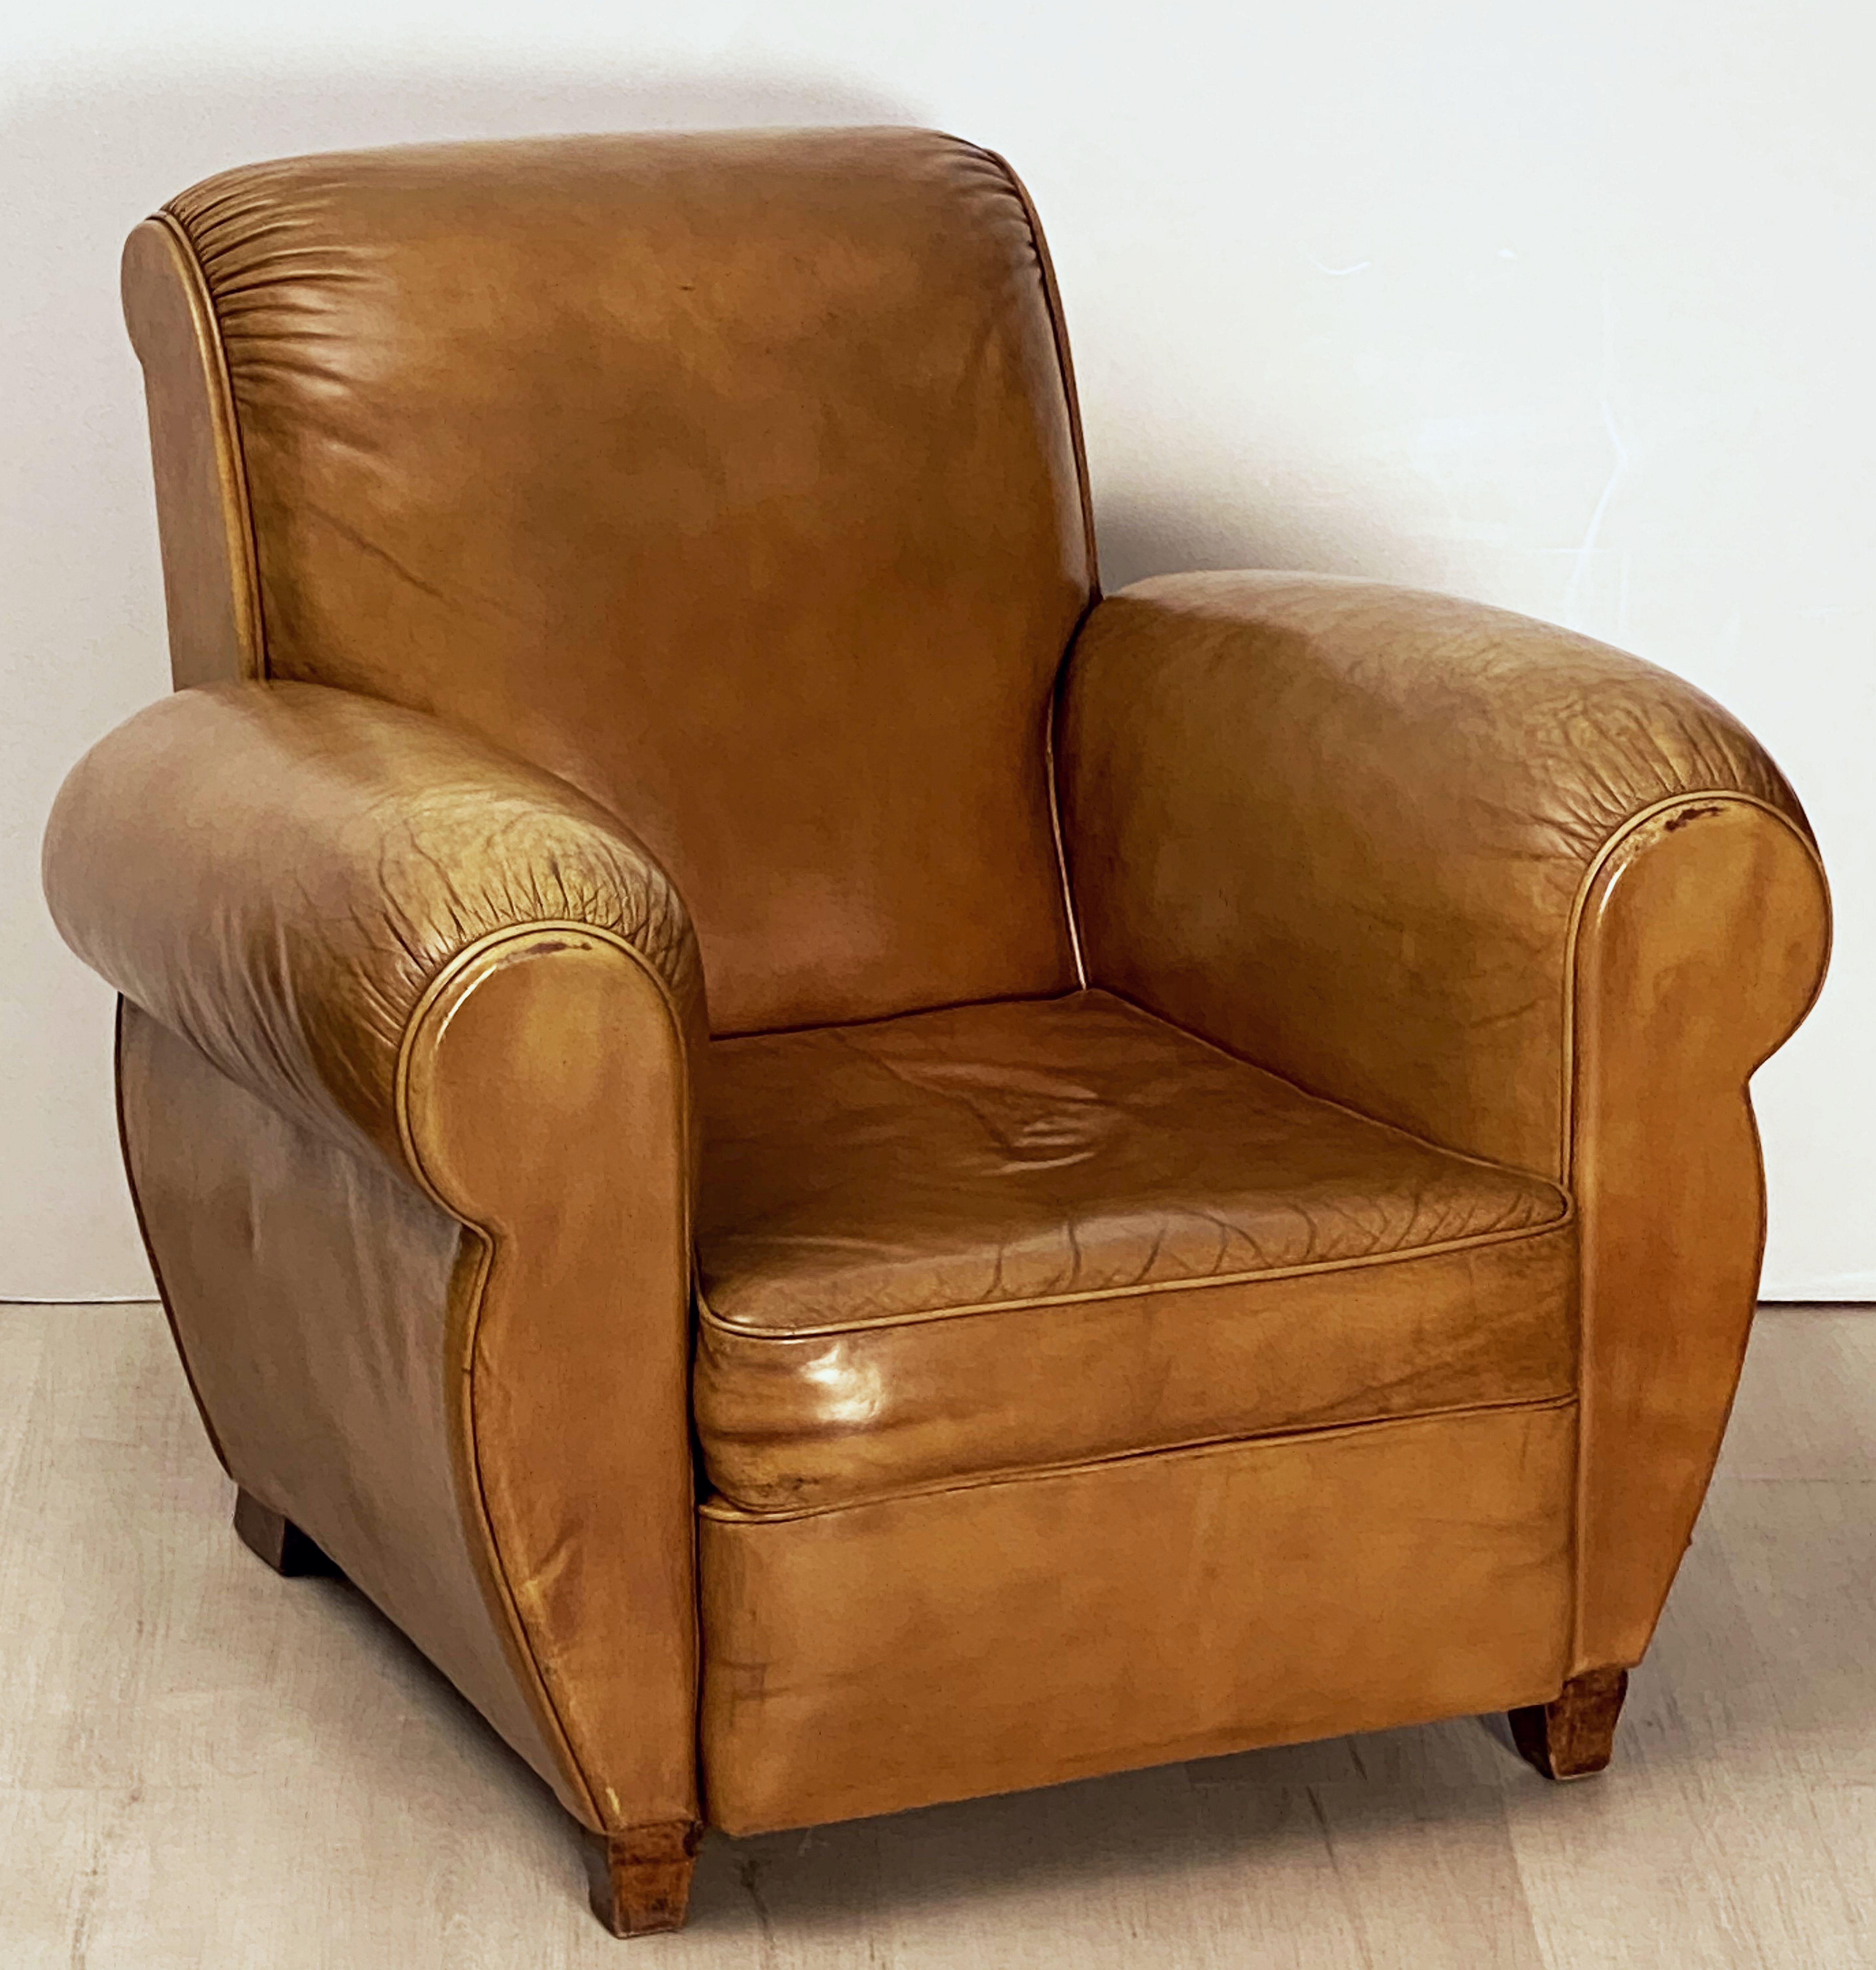 20th Century Art Deco Leather Club Chairs from France 'Priced as a Pair'